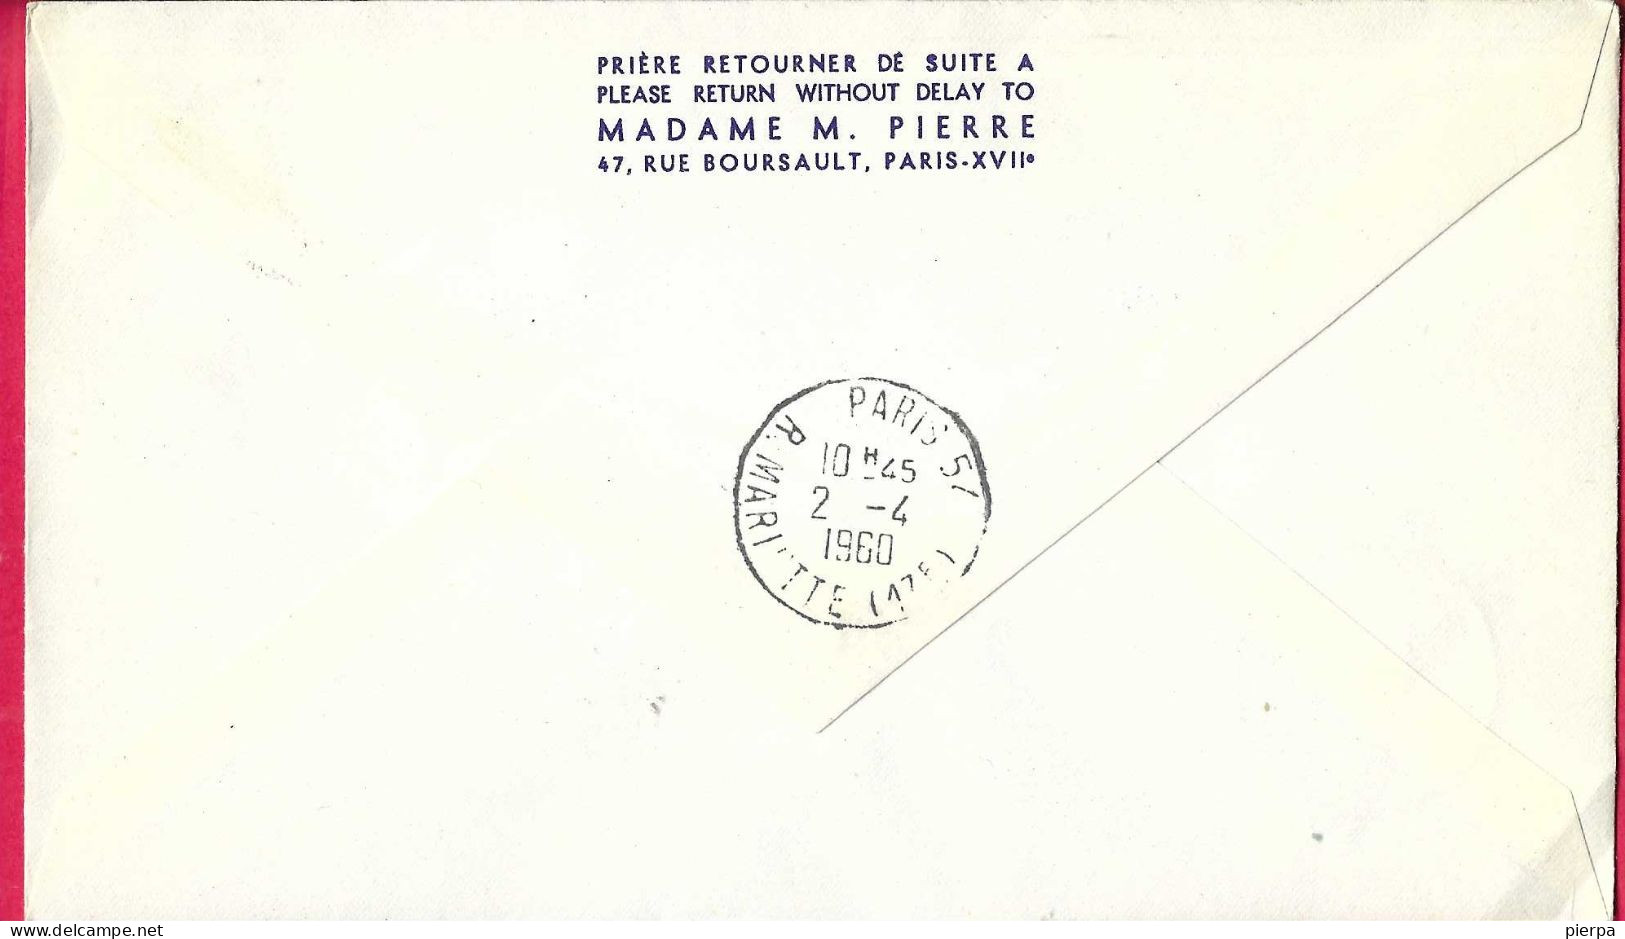 SVERIGE - FIRST CARAVELLE FLIGHT AIR FRANCE FROM STOCKHOLM TO PARIS *1.4.1960* ON OFFICIAL COVER - Briefe U. Dokumente